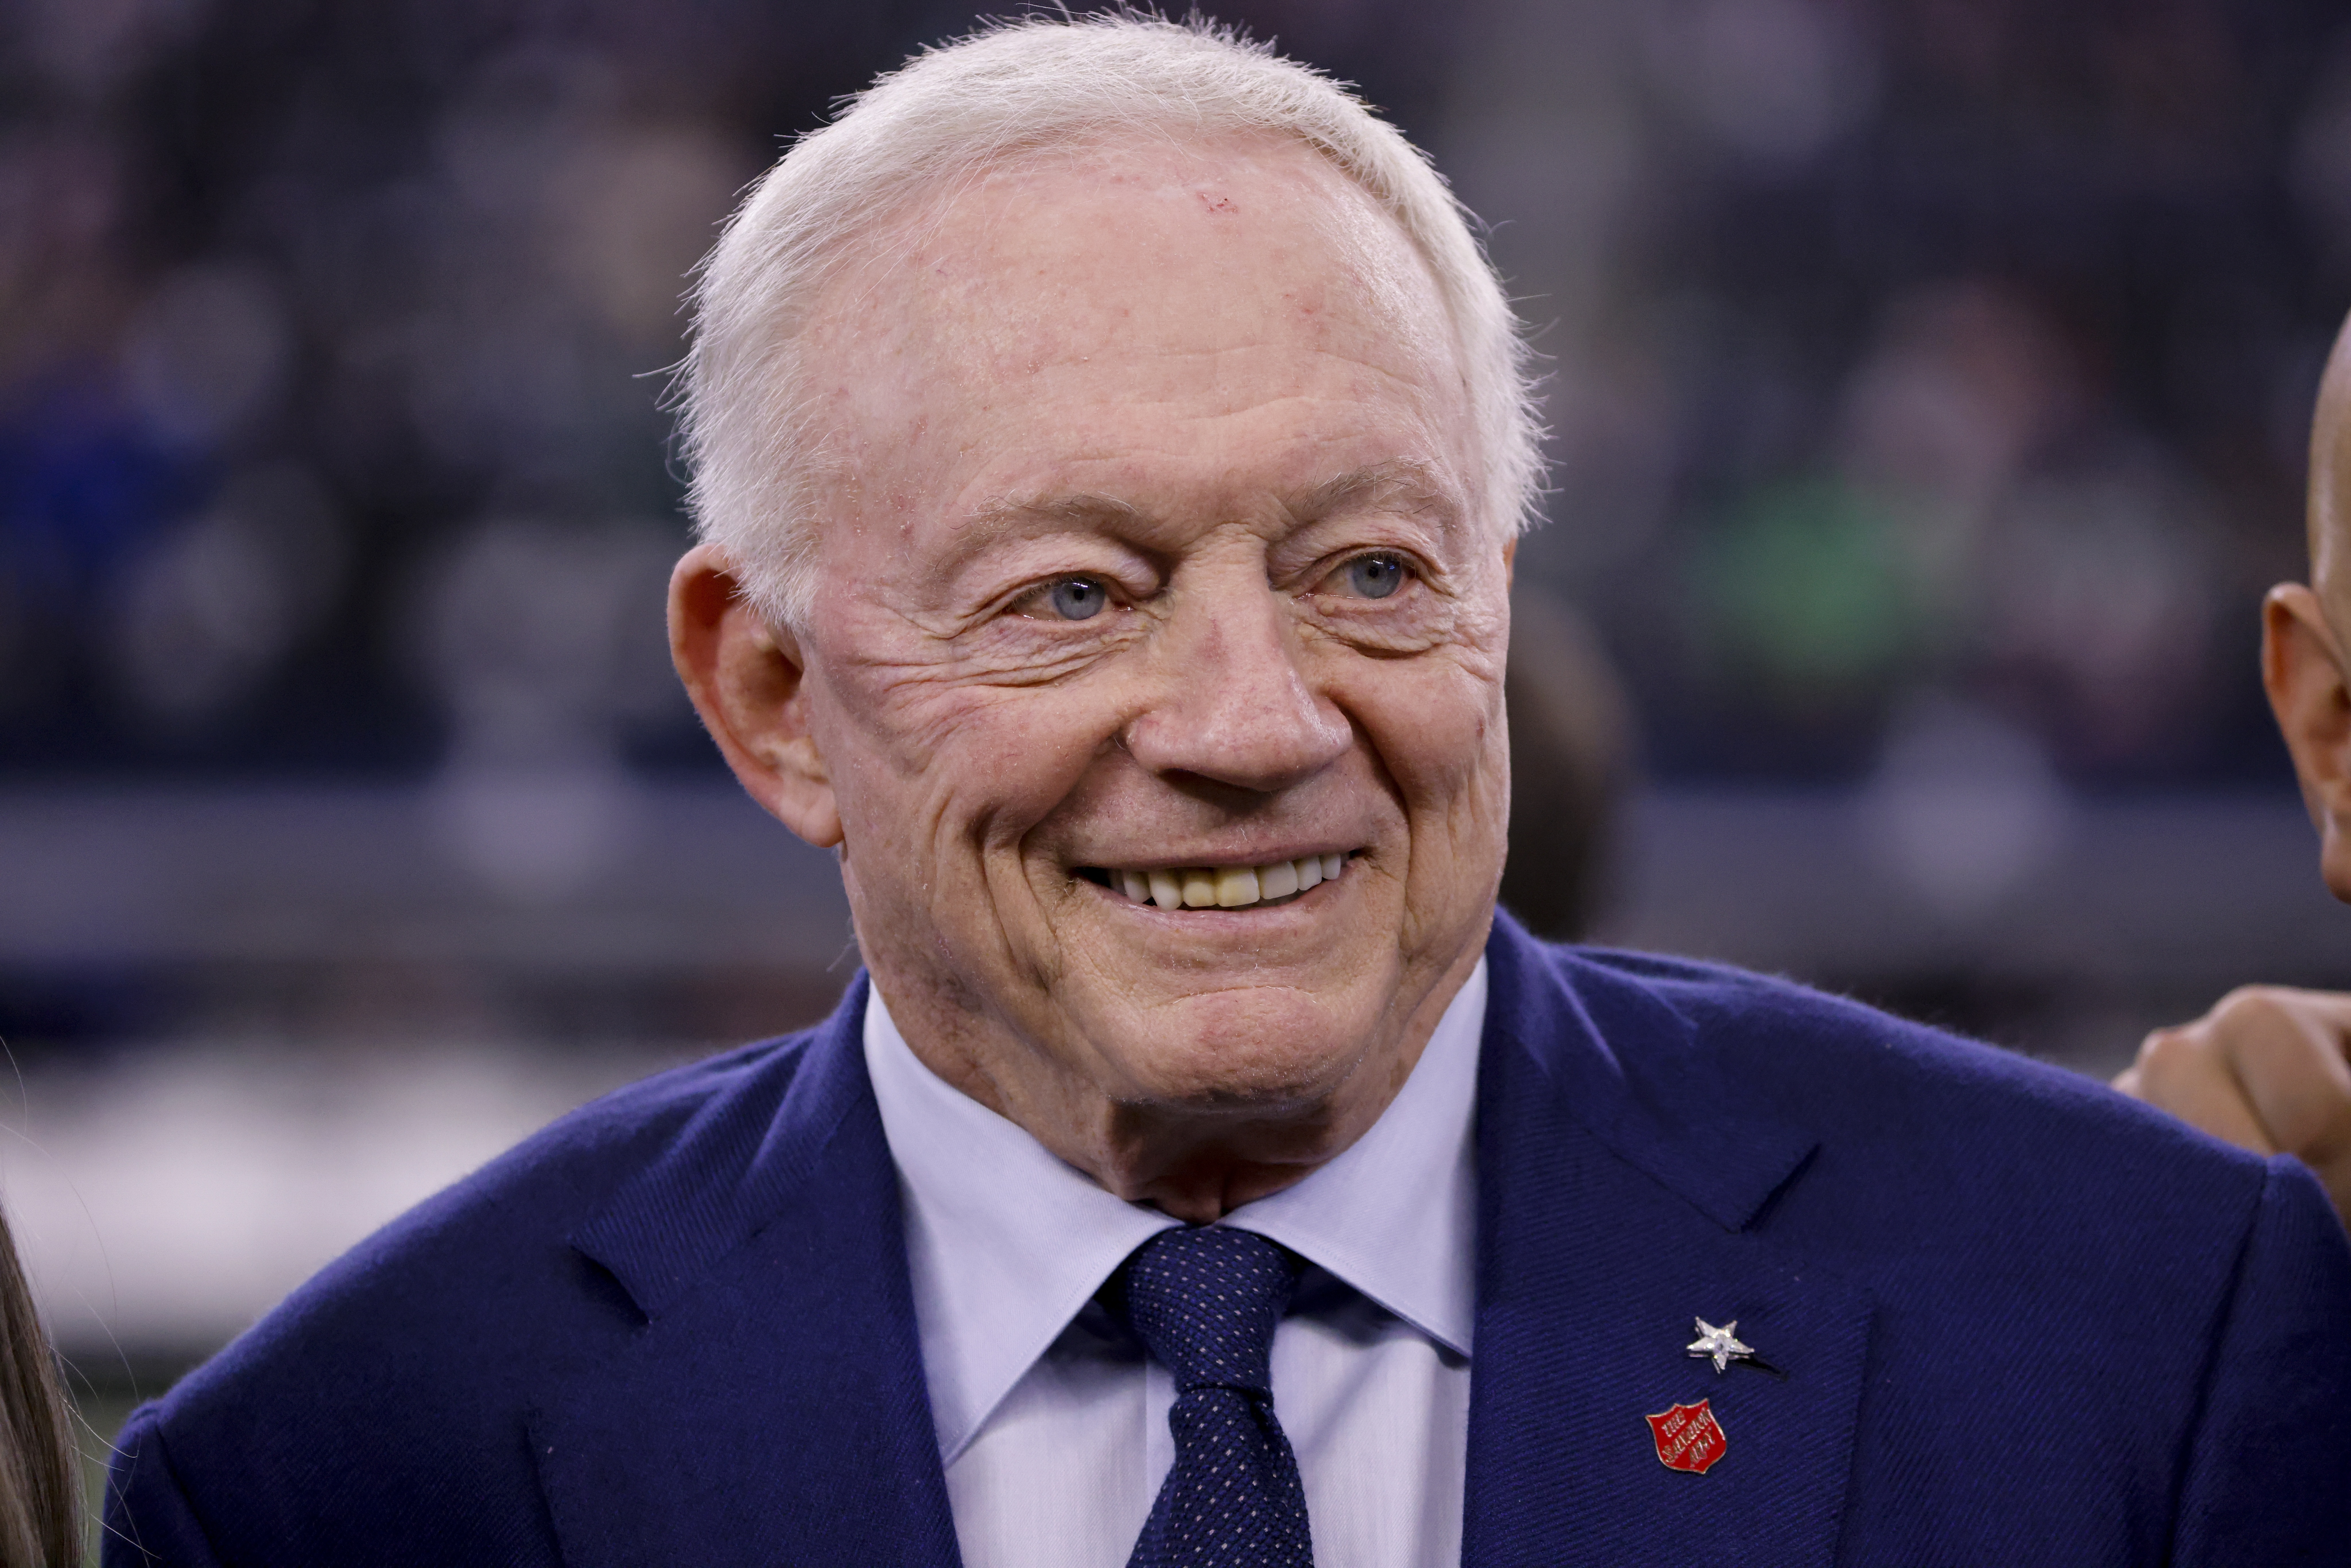 Jerry Jones said he is considering other coaches for the Ring of Honor. Jason Minnix is wondering who besides Jimmy Johnson has earned that honor.